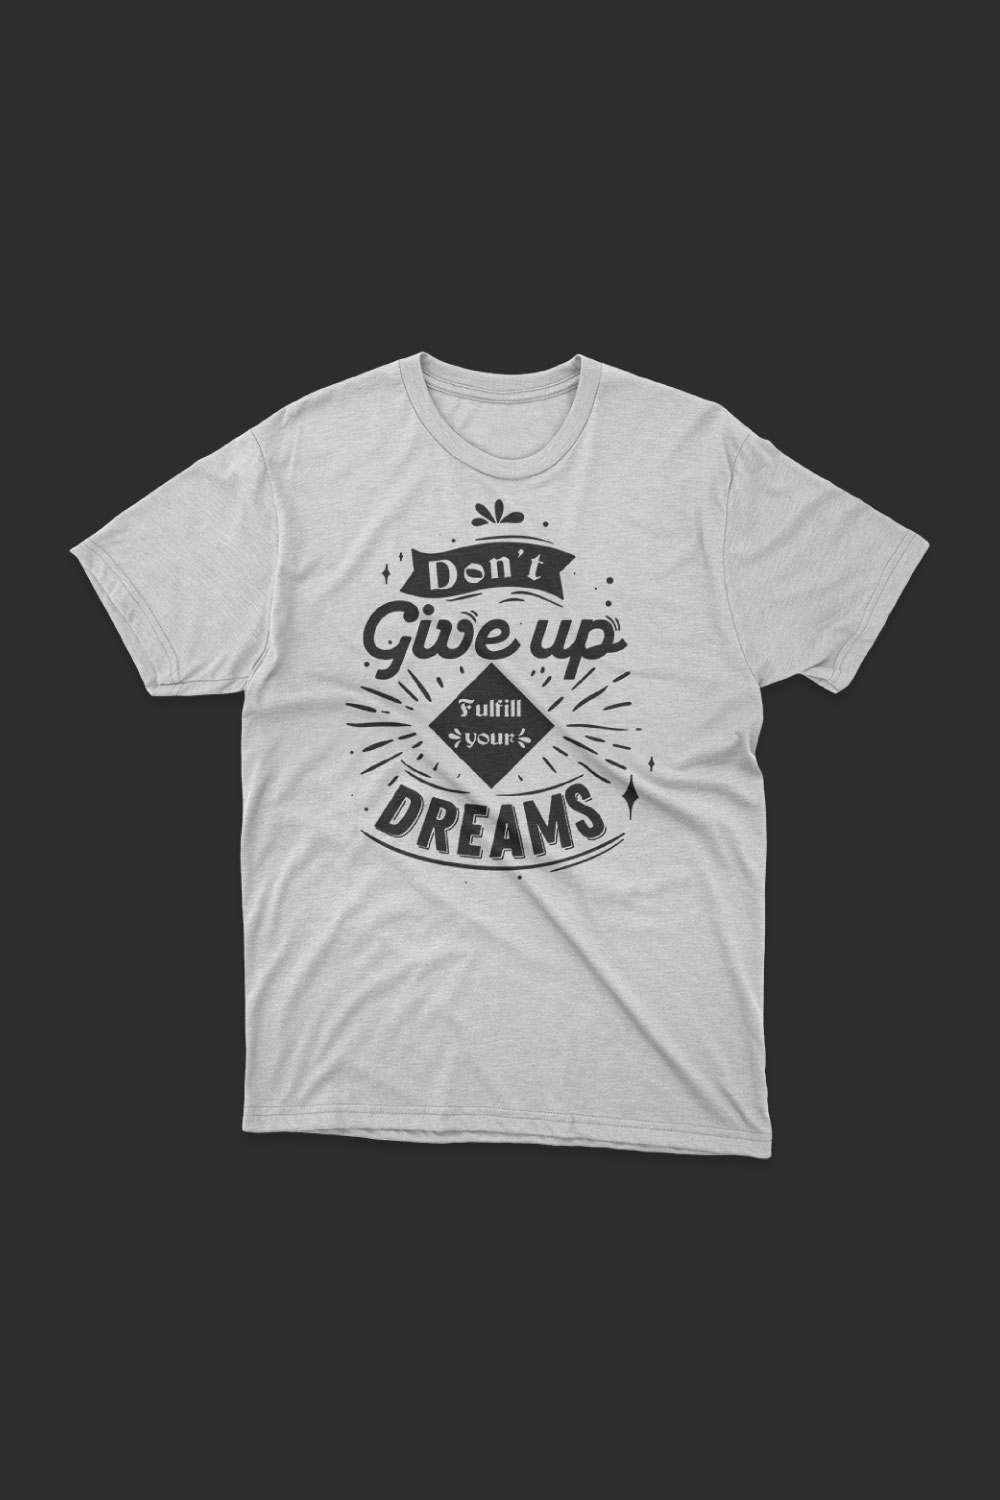 dont give up fulfill your dreams tshirt design 1000x1500 pinterest 202